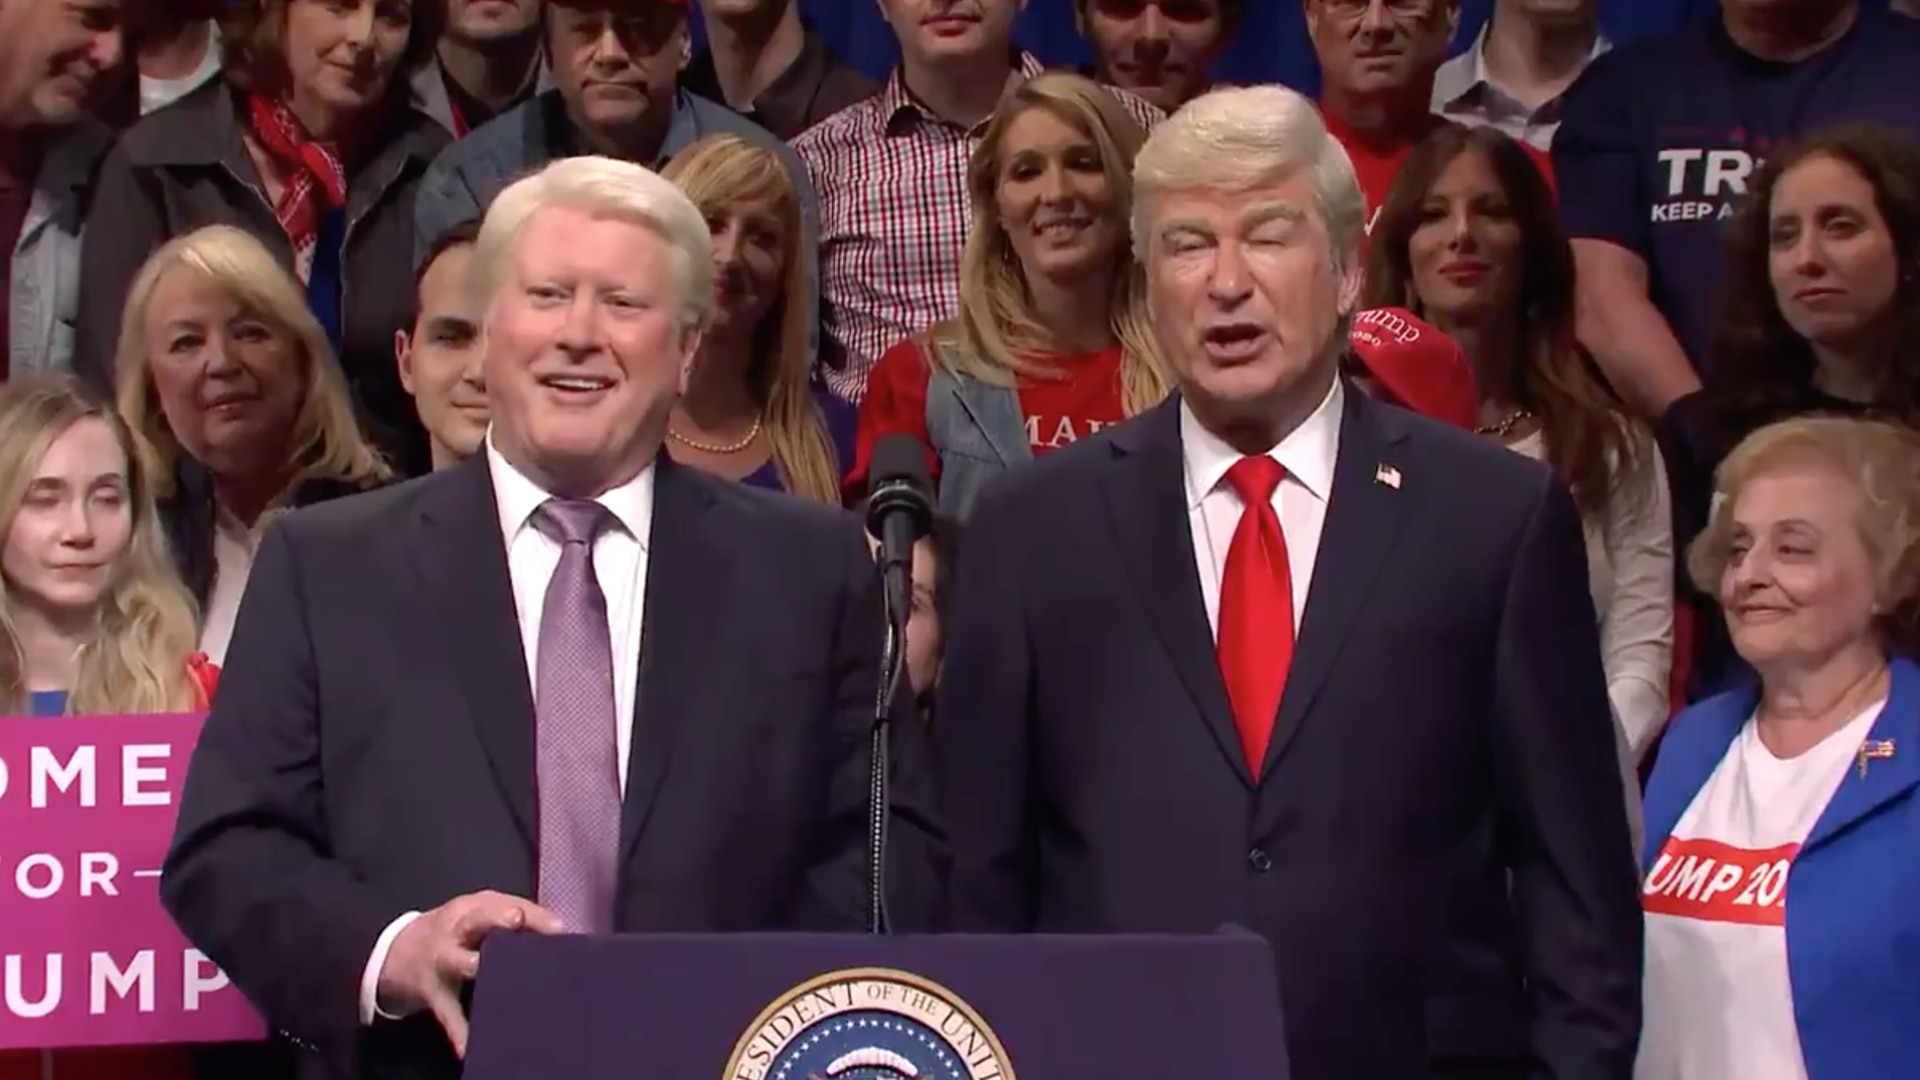 A screenshot of Darrell Hammond and Alec Baldwin on "SNL" as former President Bill Clinton and President Trump, respectively.